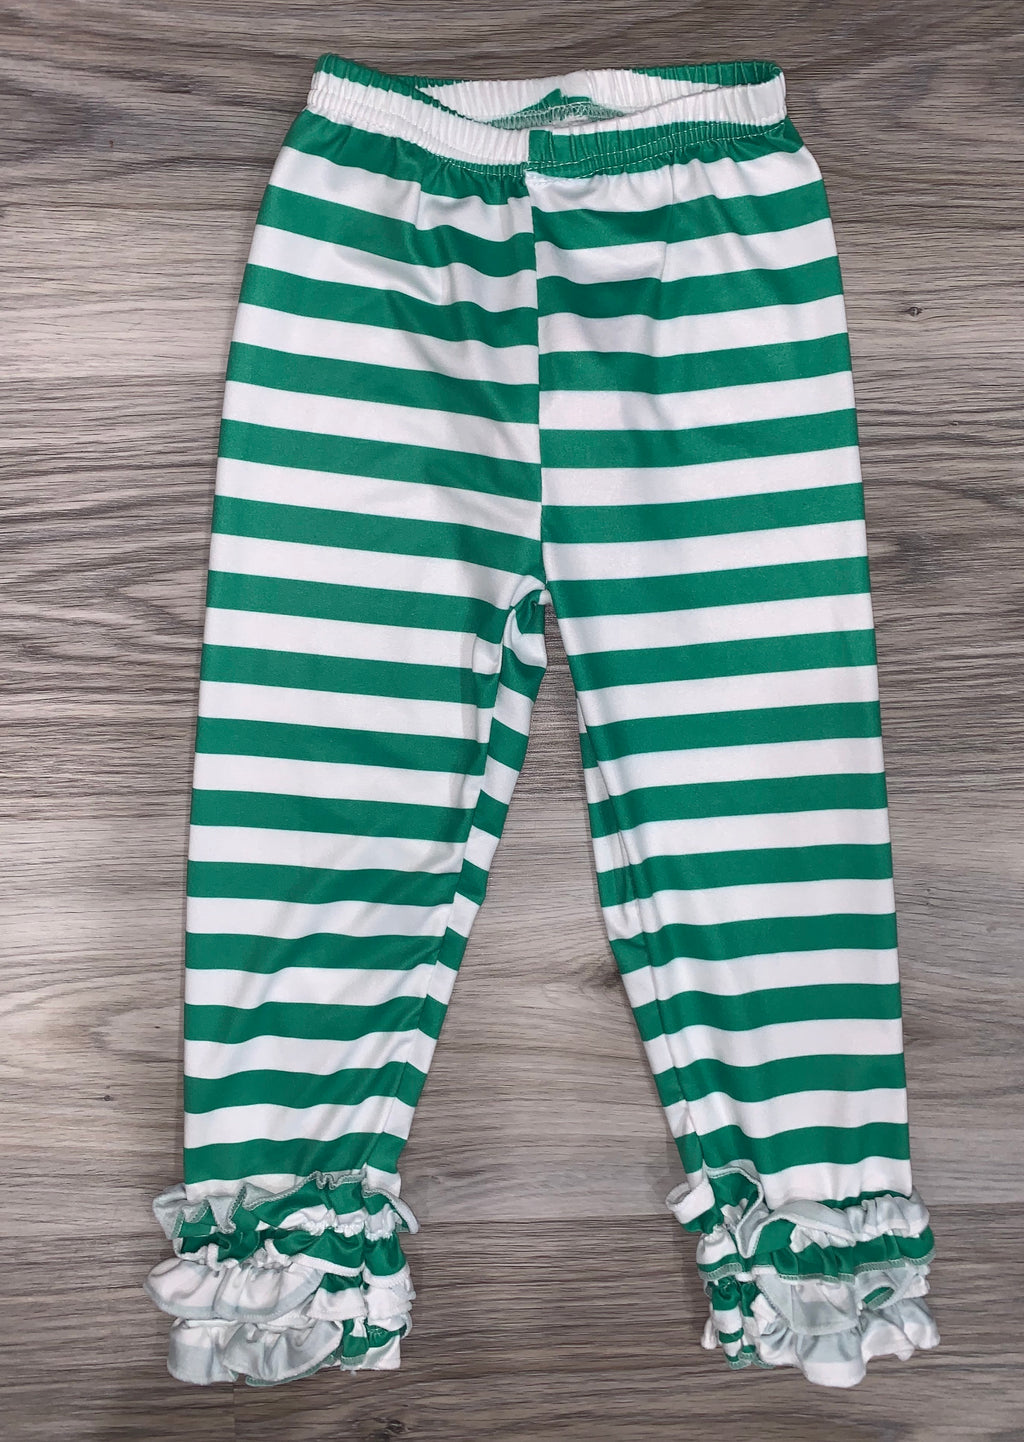 Icing Pants (Green and White Striped)